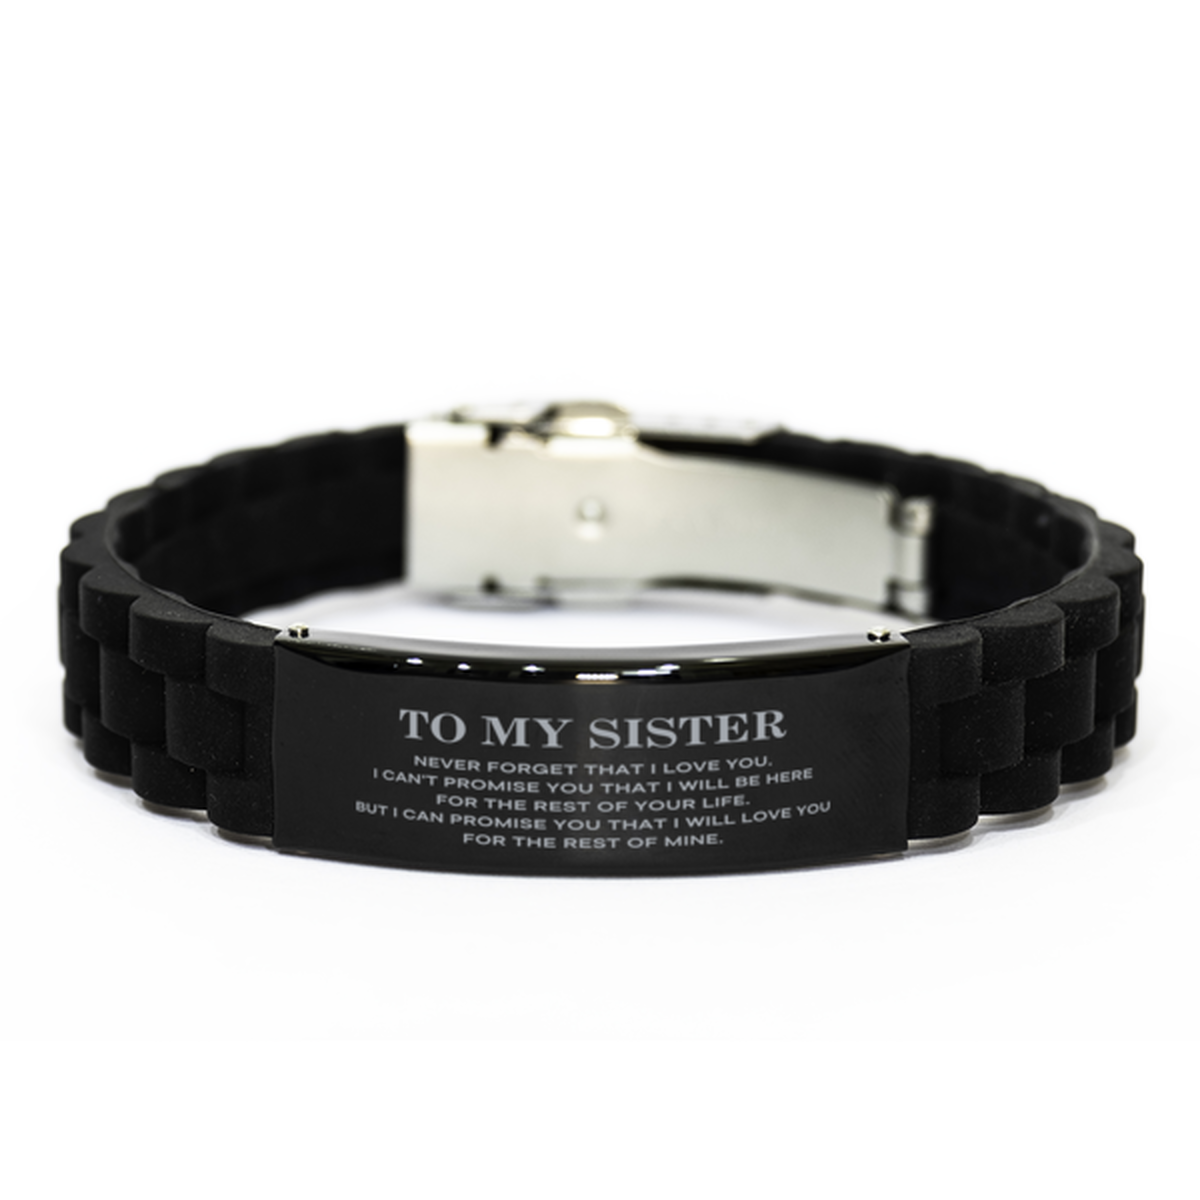 To My Sister Gifts, I will love you for the rest of mine, Love Sister Bracelet, Birthday Christmas Unique Black Glidelock Clasp Bracelet For Sister